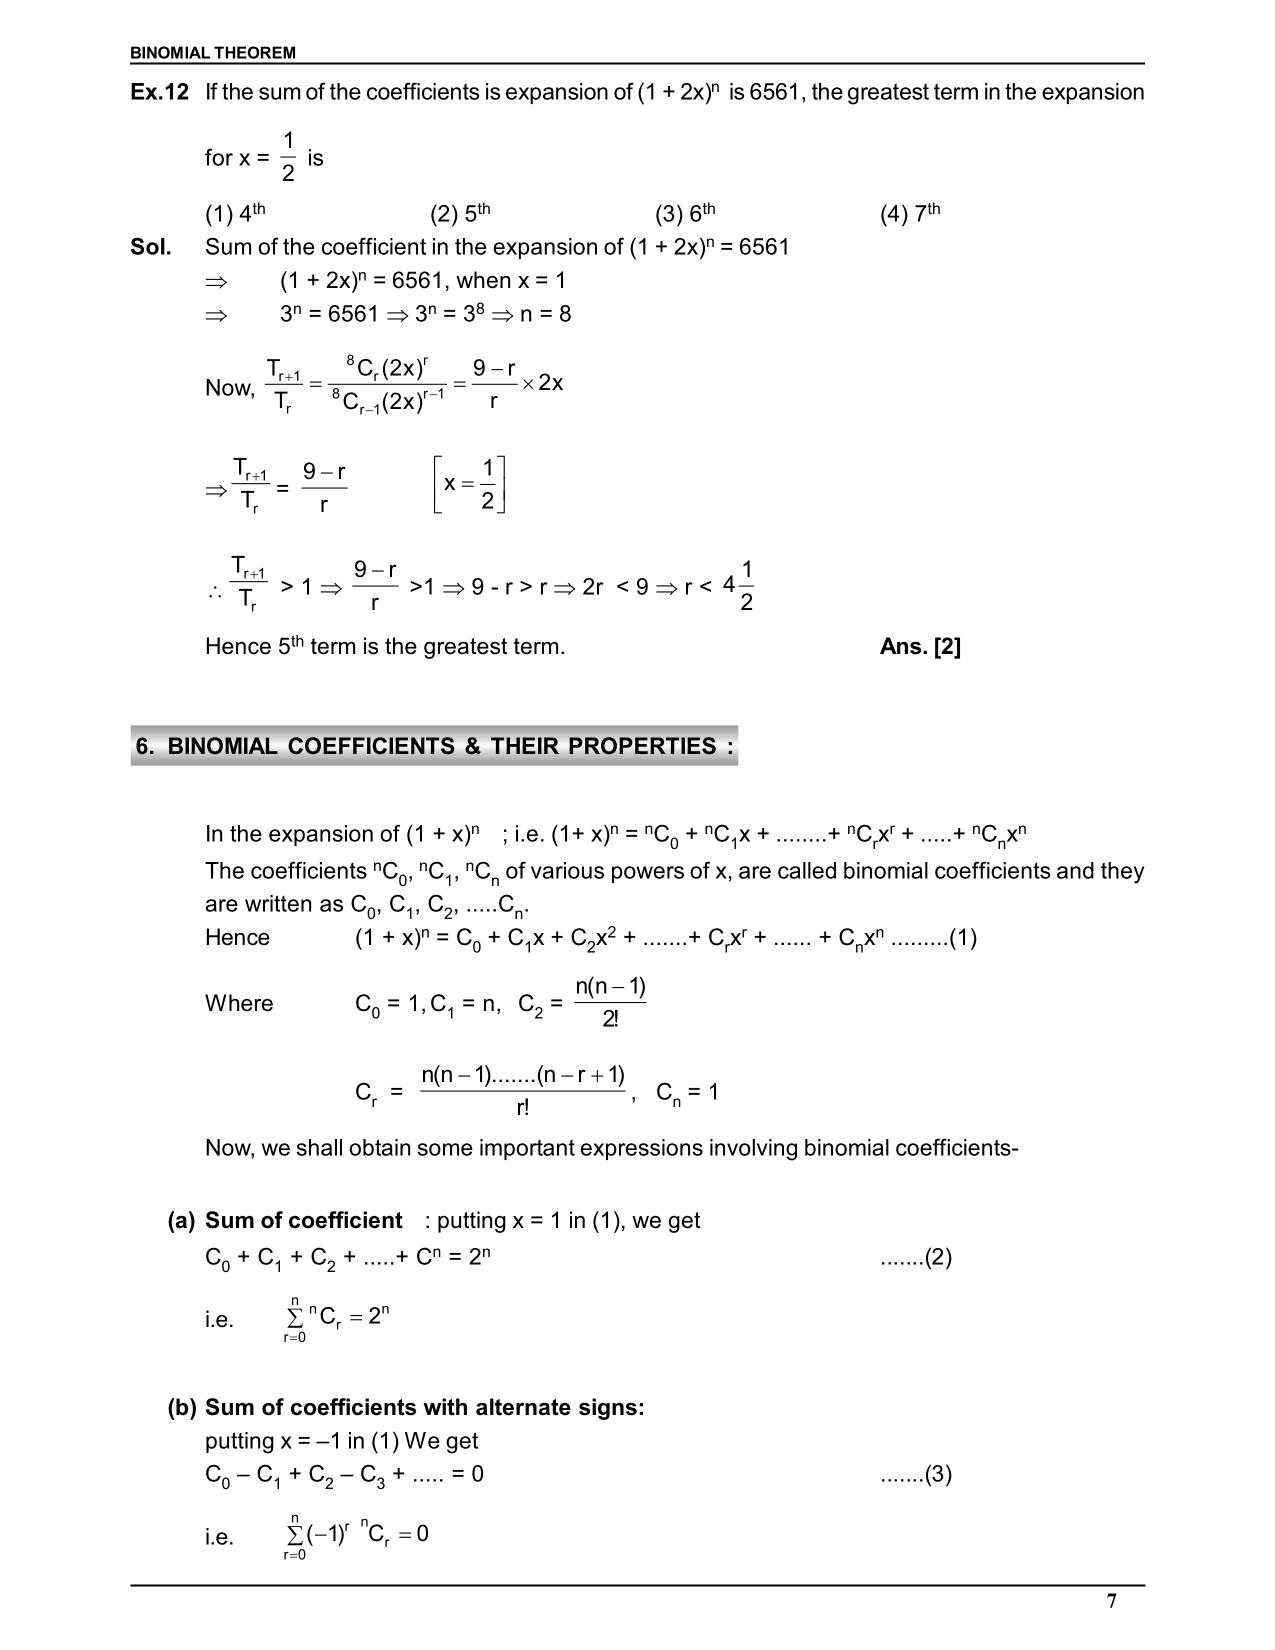 Binomial Theorem Class 11 Notes: Coefficient and Properties